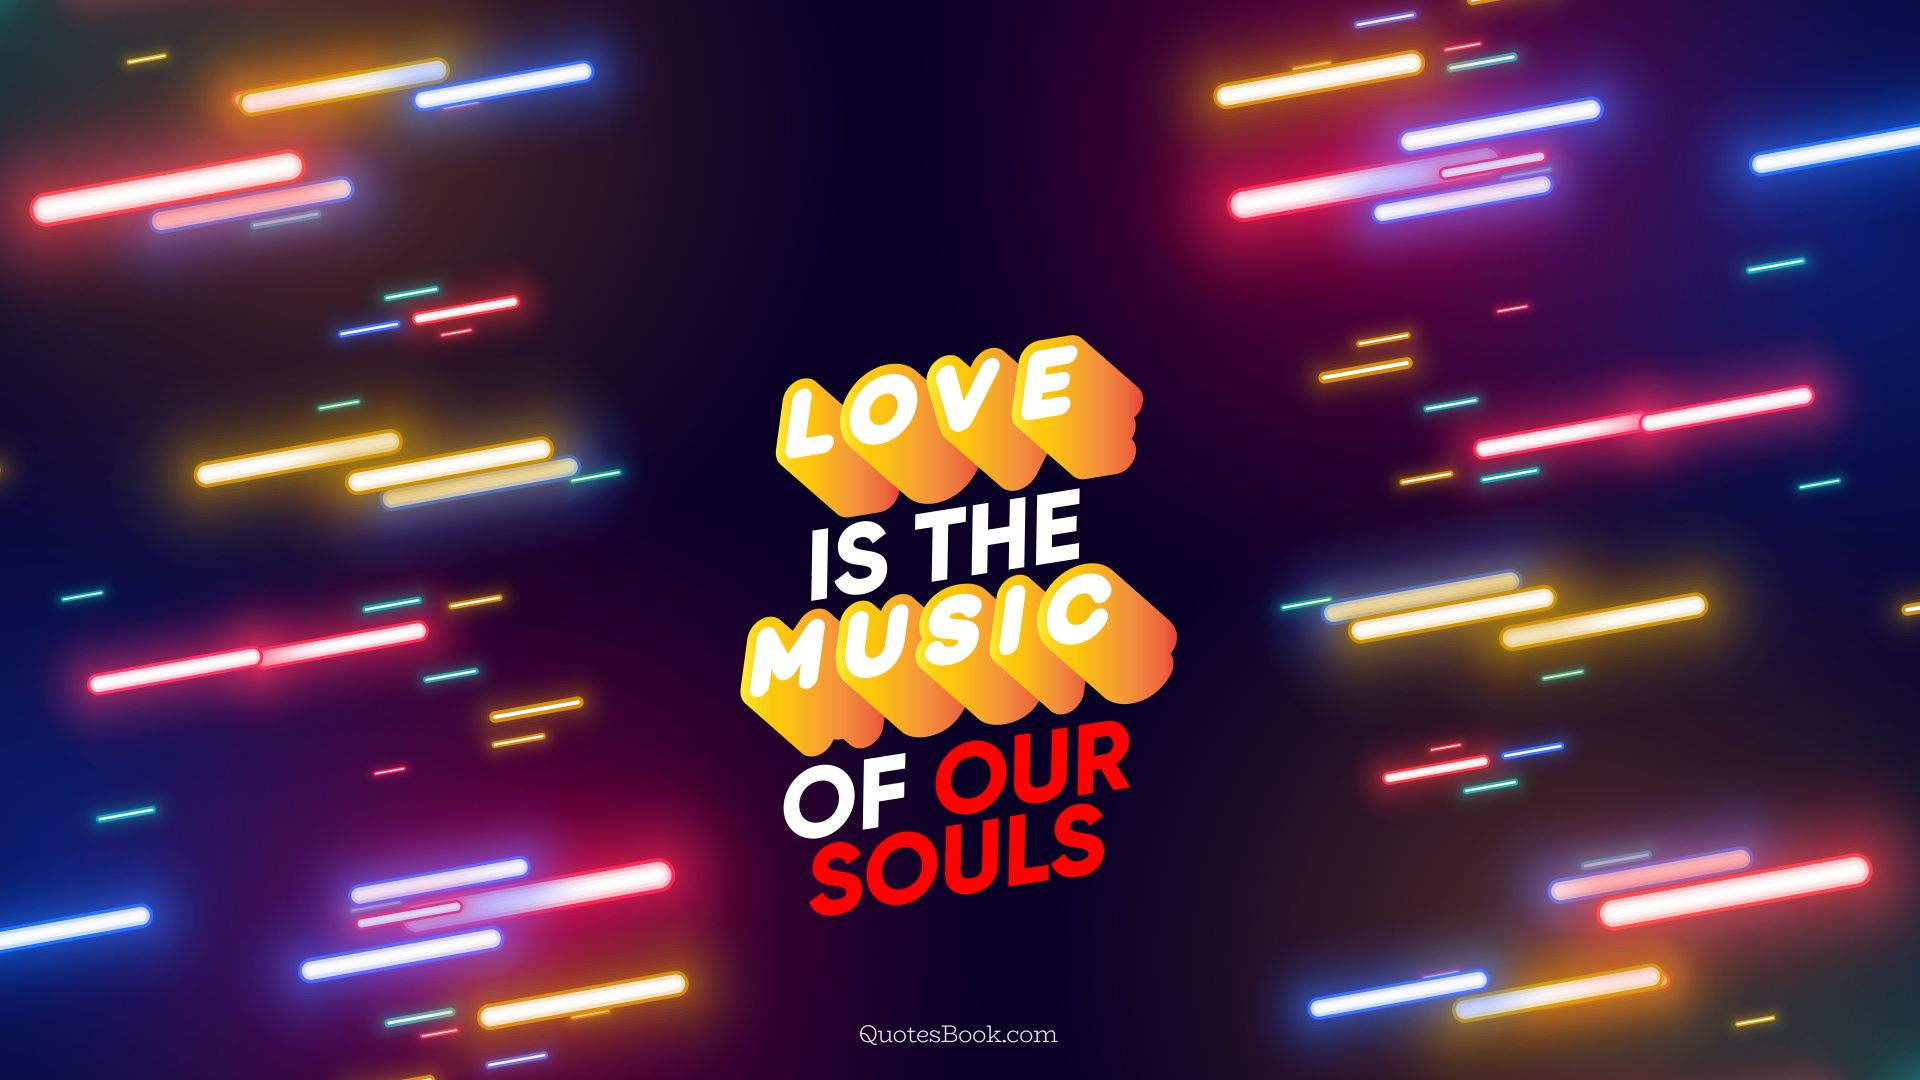 Love is the music of our souls. - Quote by QuotesBook